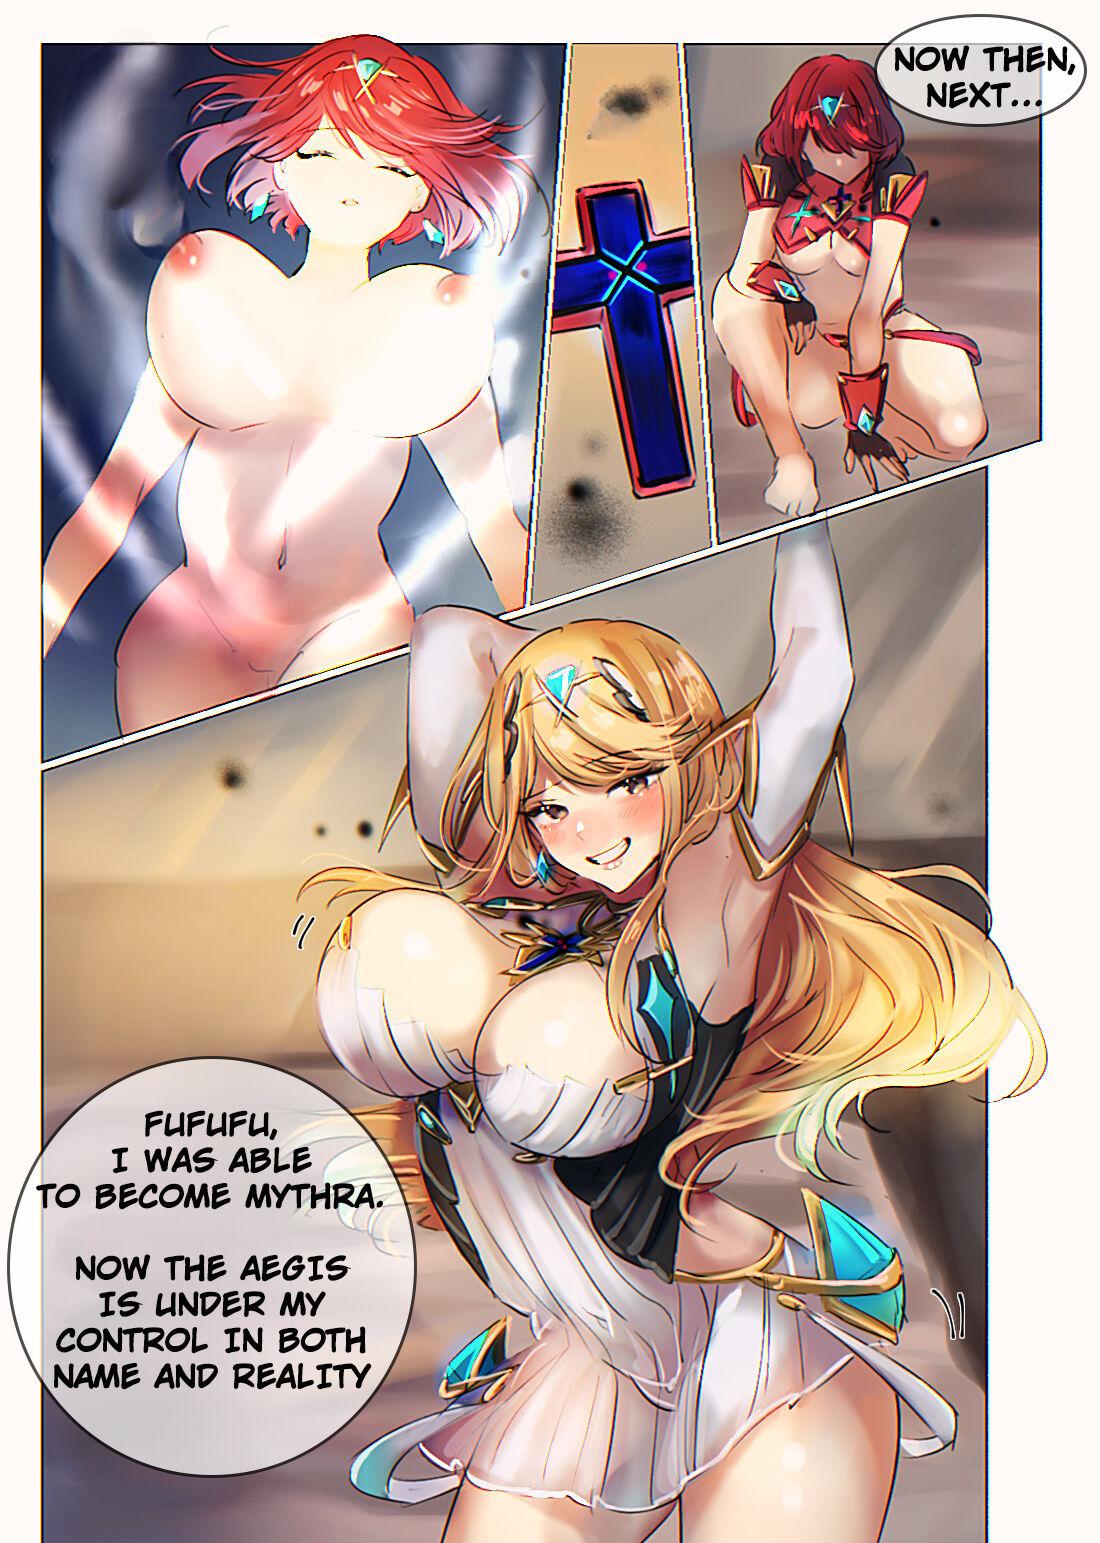 Stepbrother Possessing Pyra and Mythra - Xenoblade chronicles 2 Amateur Blowjob - Page 10